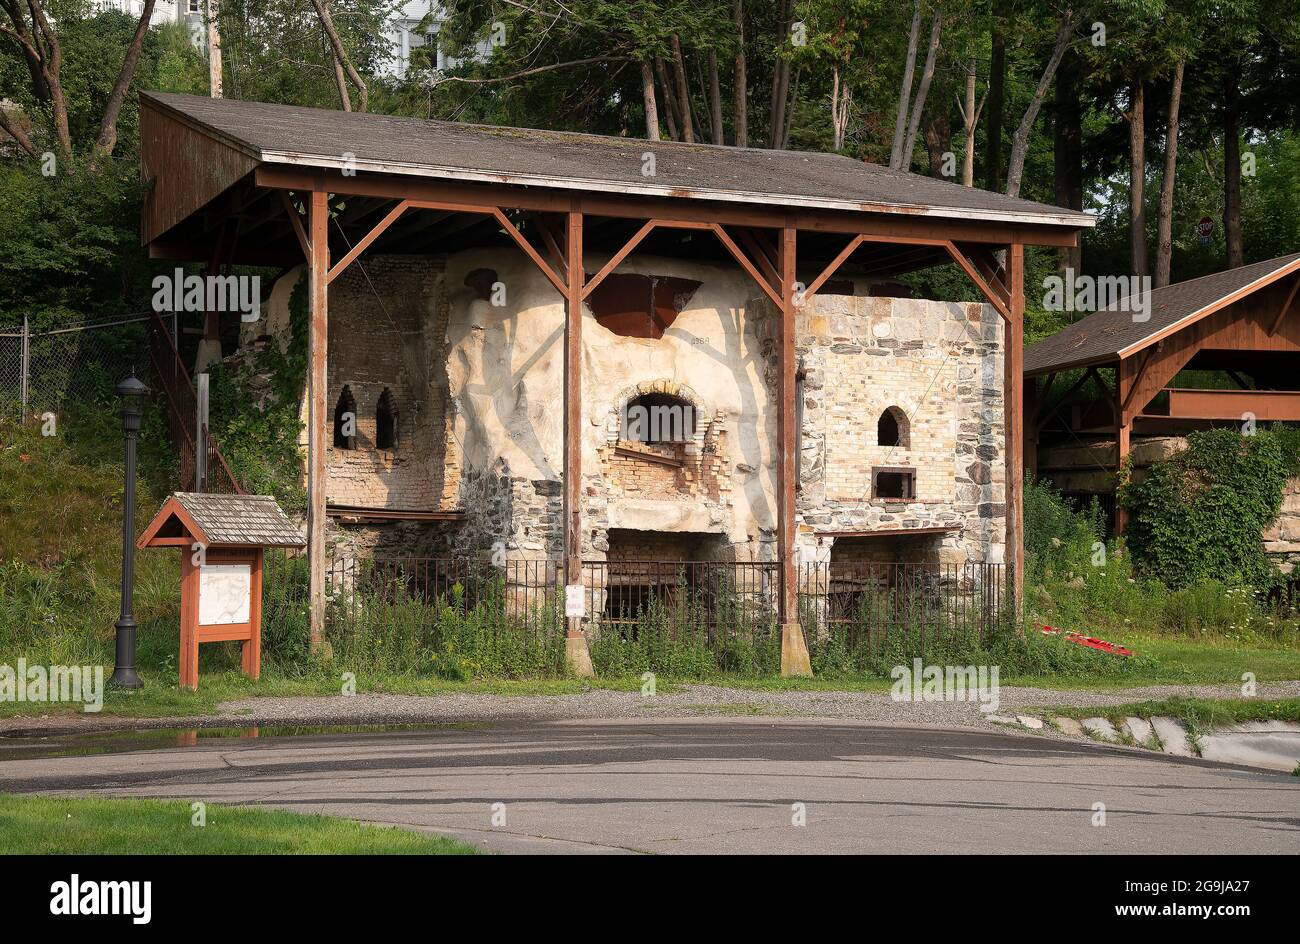 The preserved historic lime kilns in Rockport, Maine, USA Stock Photo